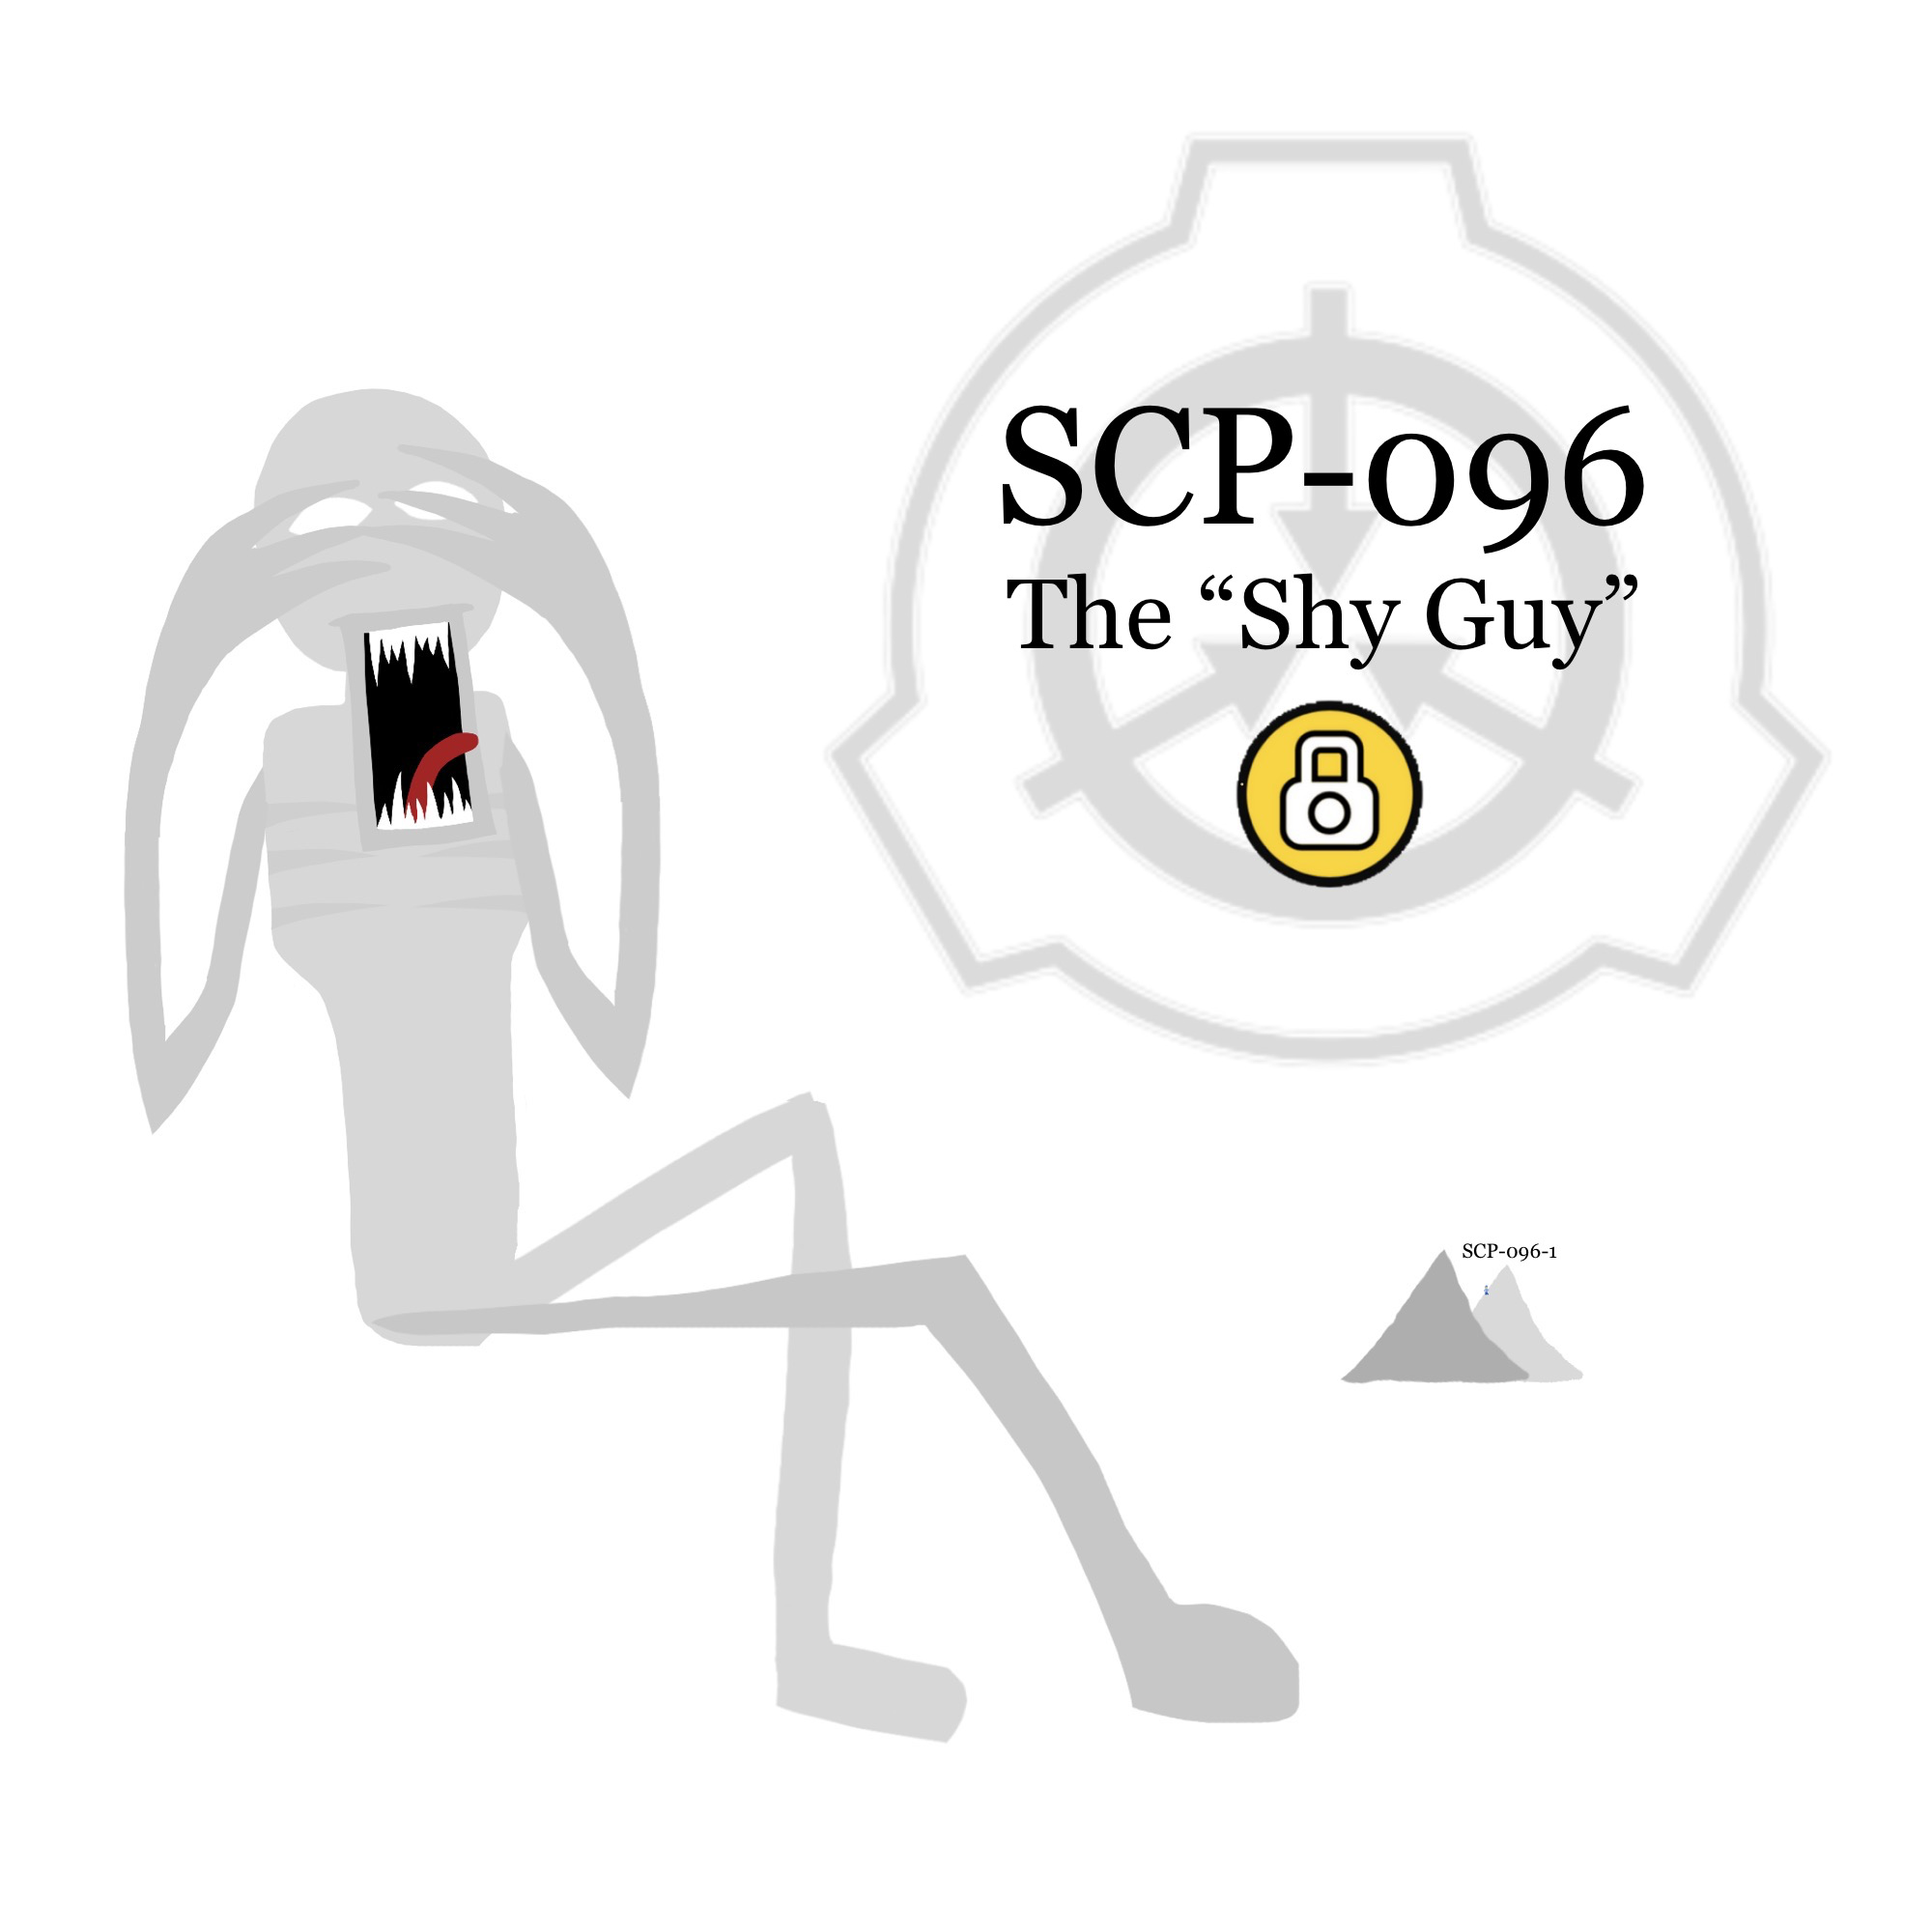 Incident 096-1-A - SCP Foundation